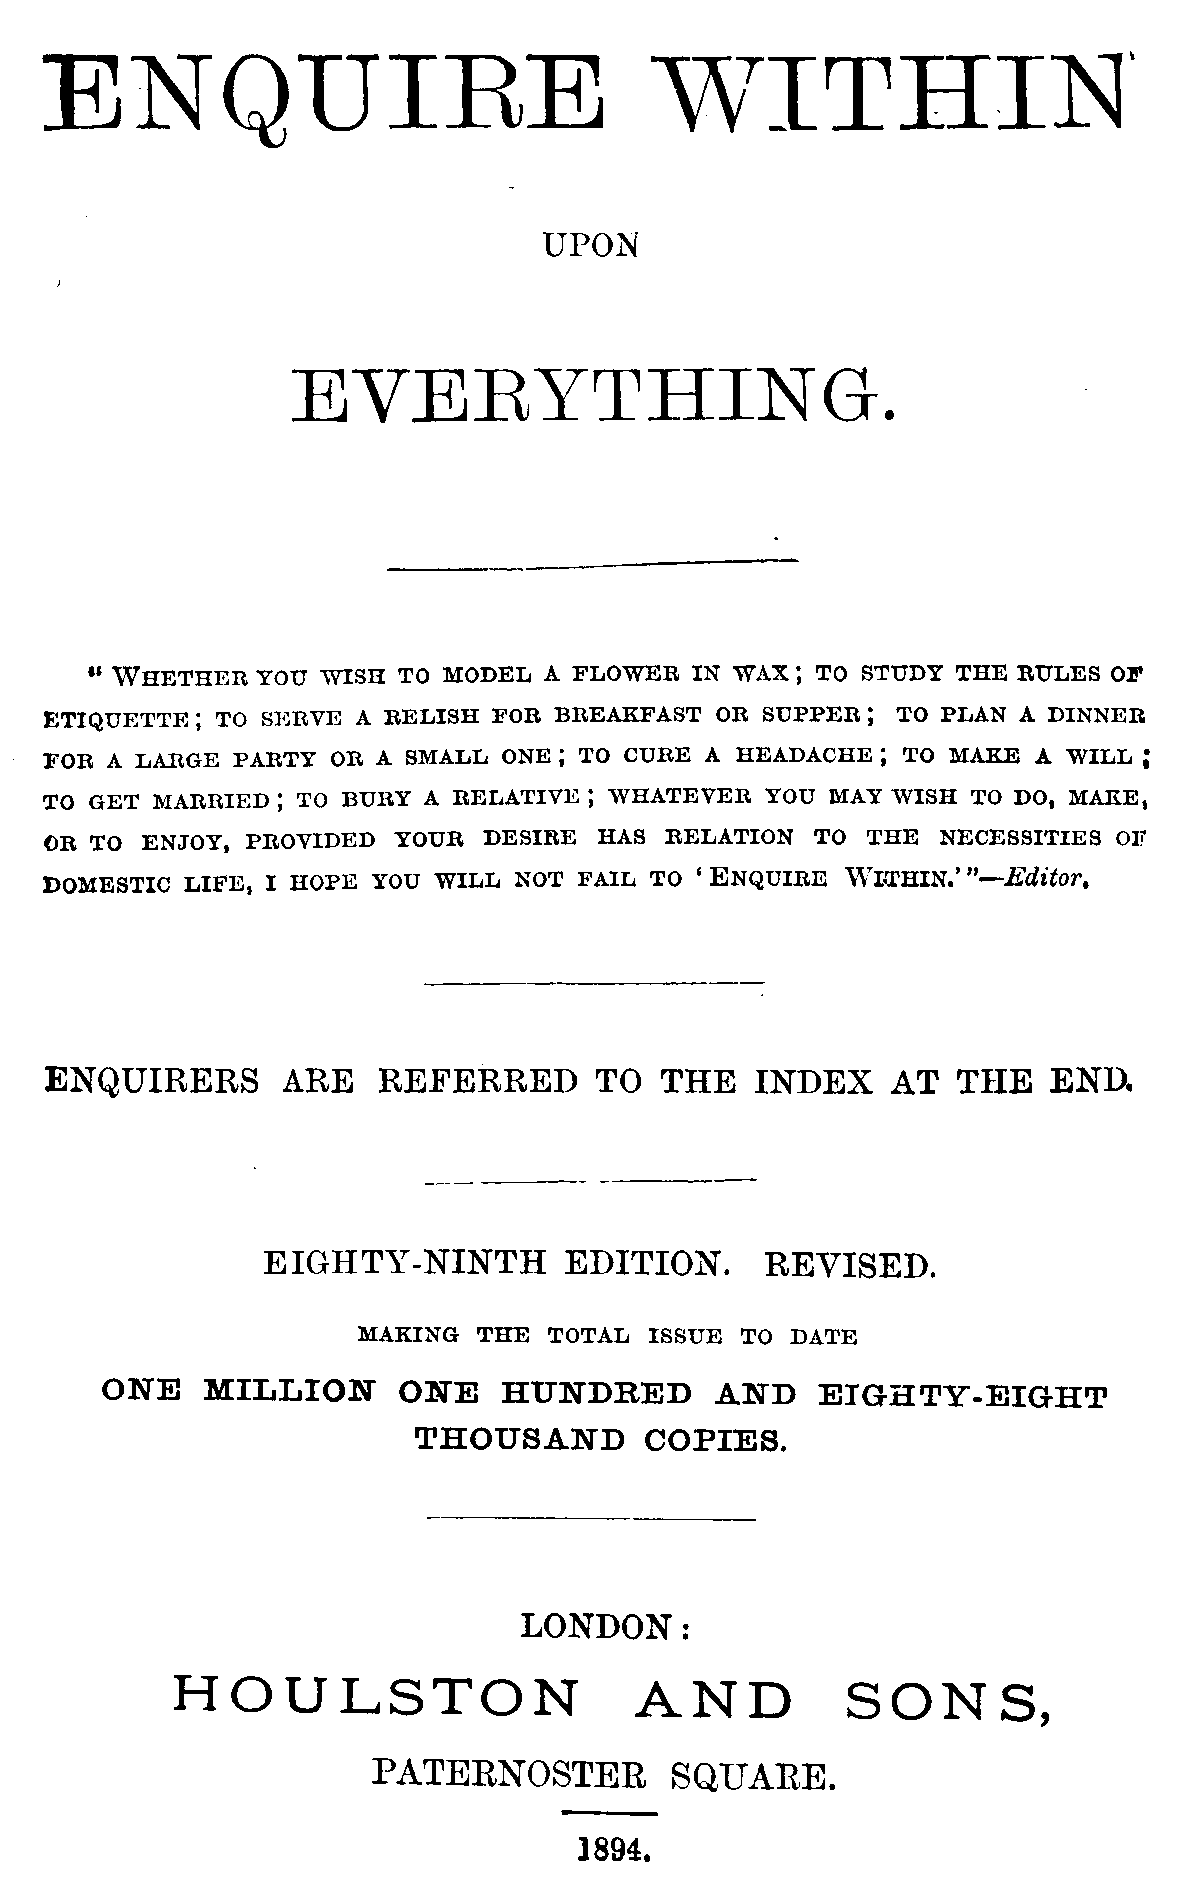 The Project Gutenberg eBook of Enquire Within Upon Everything picture